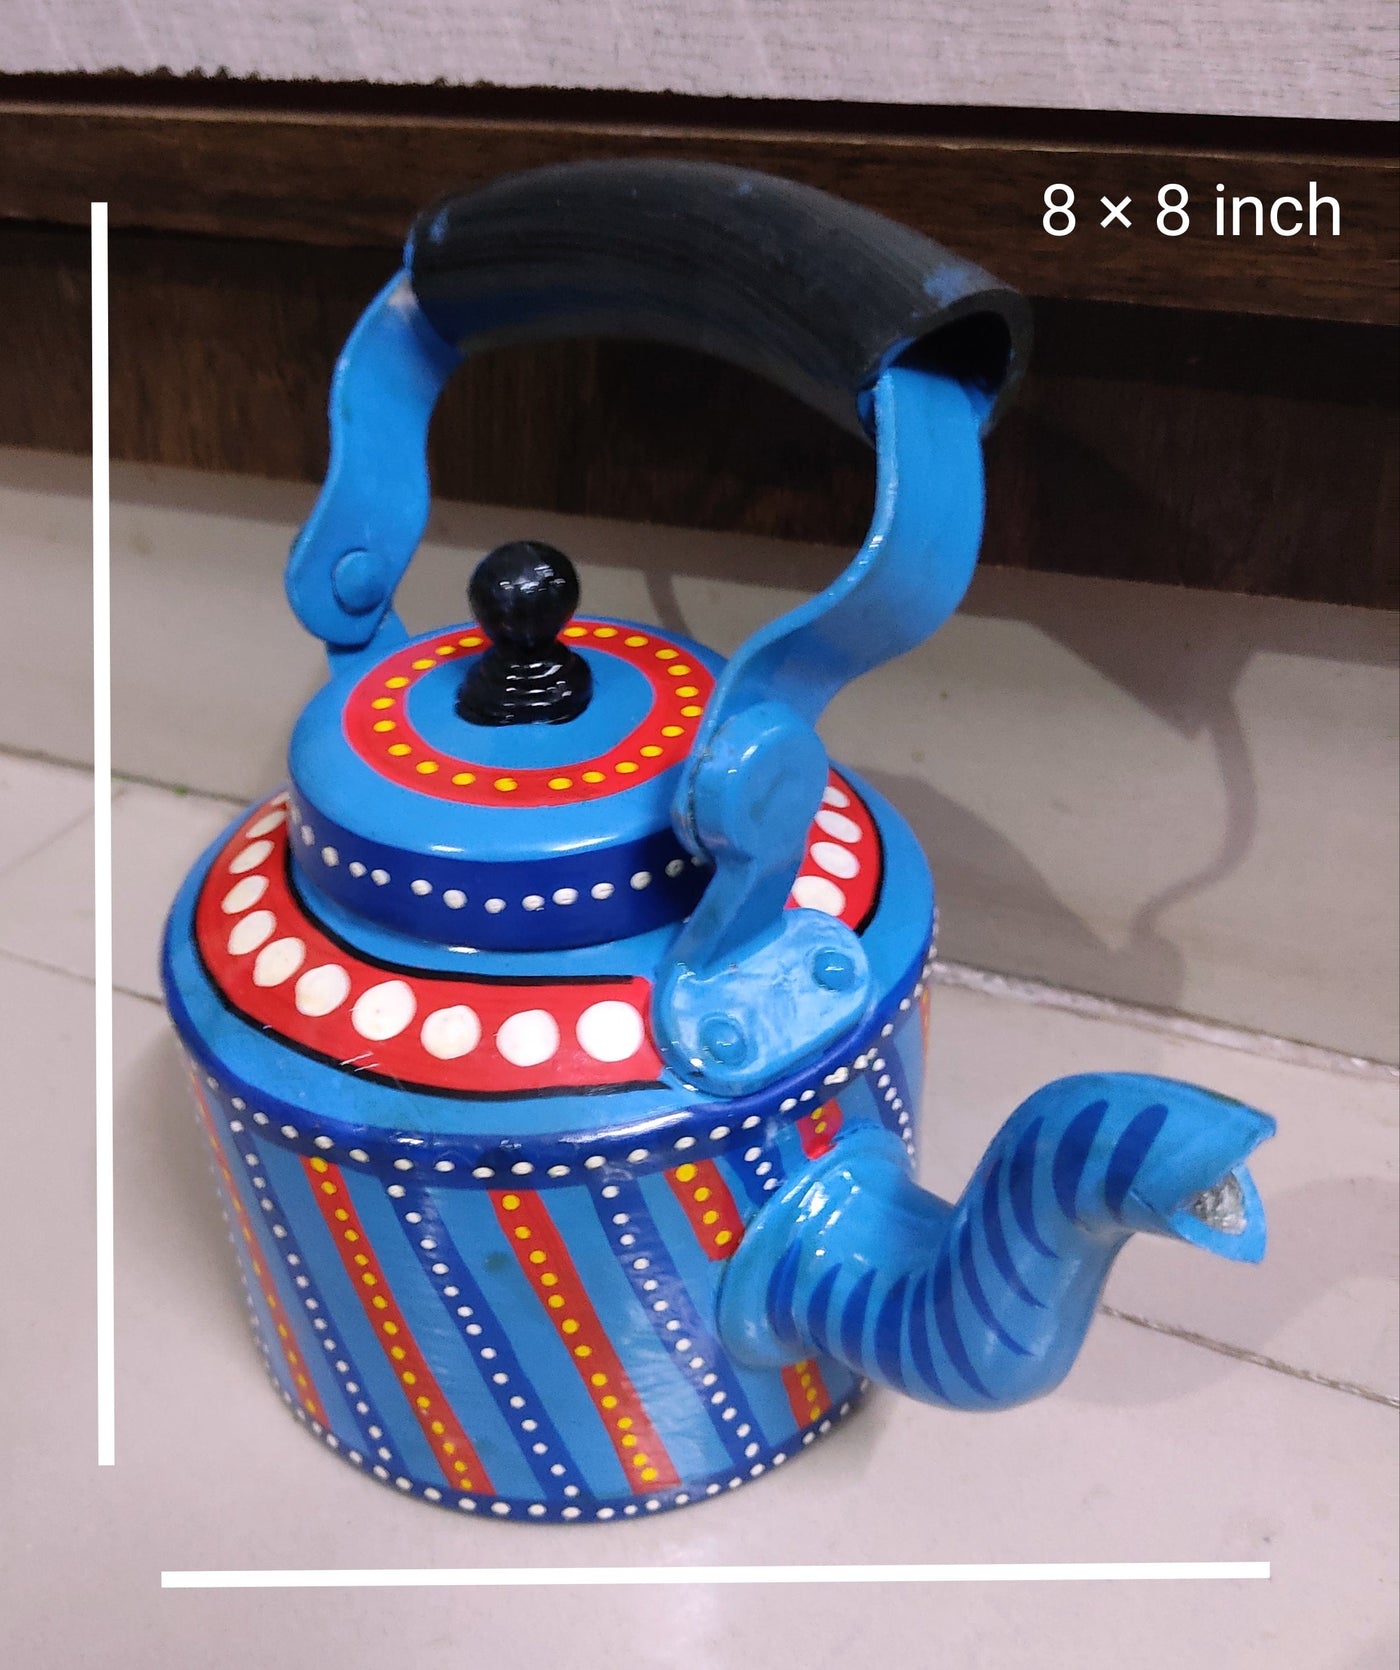 LAMANSH kettles for decor LAMANSH® (8*8 inch) Metal Oil painted Rajasthani Kettle for Event Decoration / Kettle's for Hanging Decoration backdrop decoration for festival